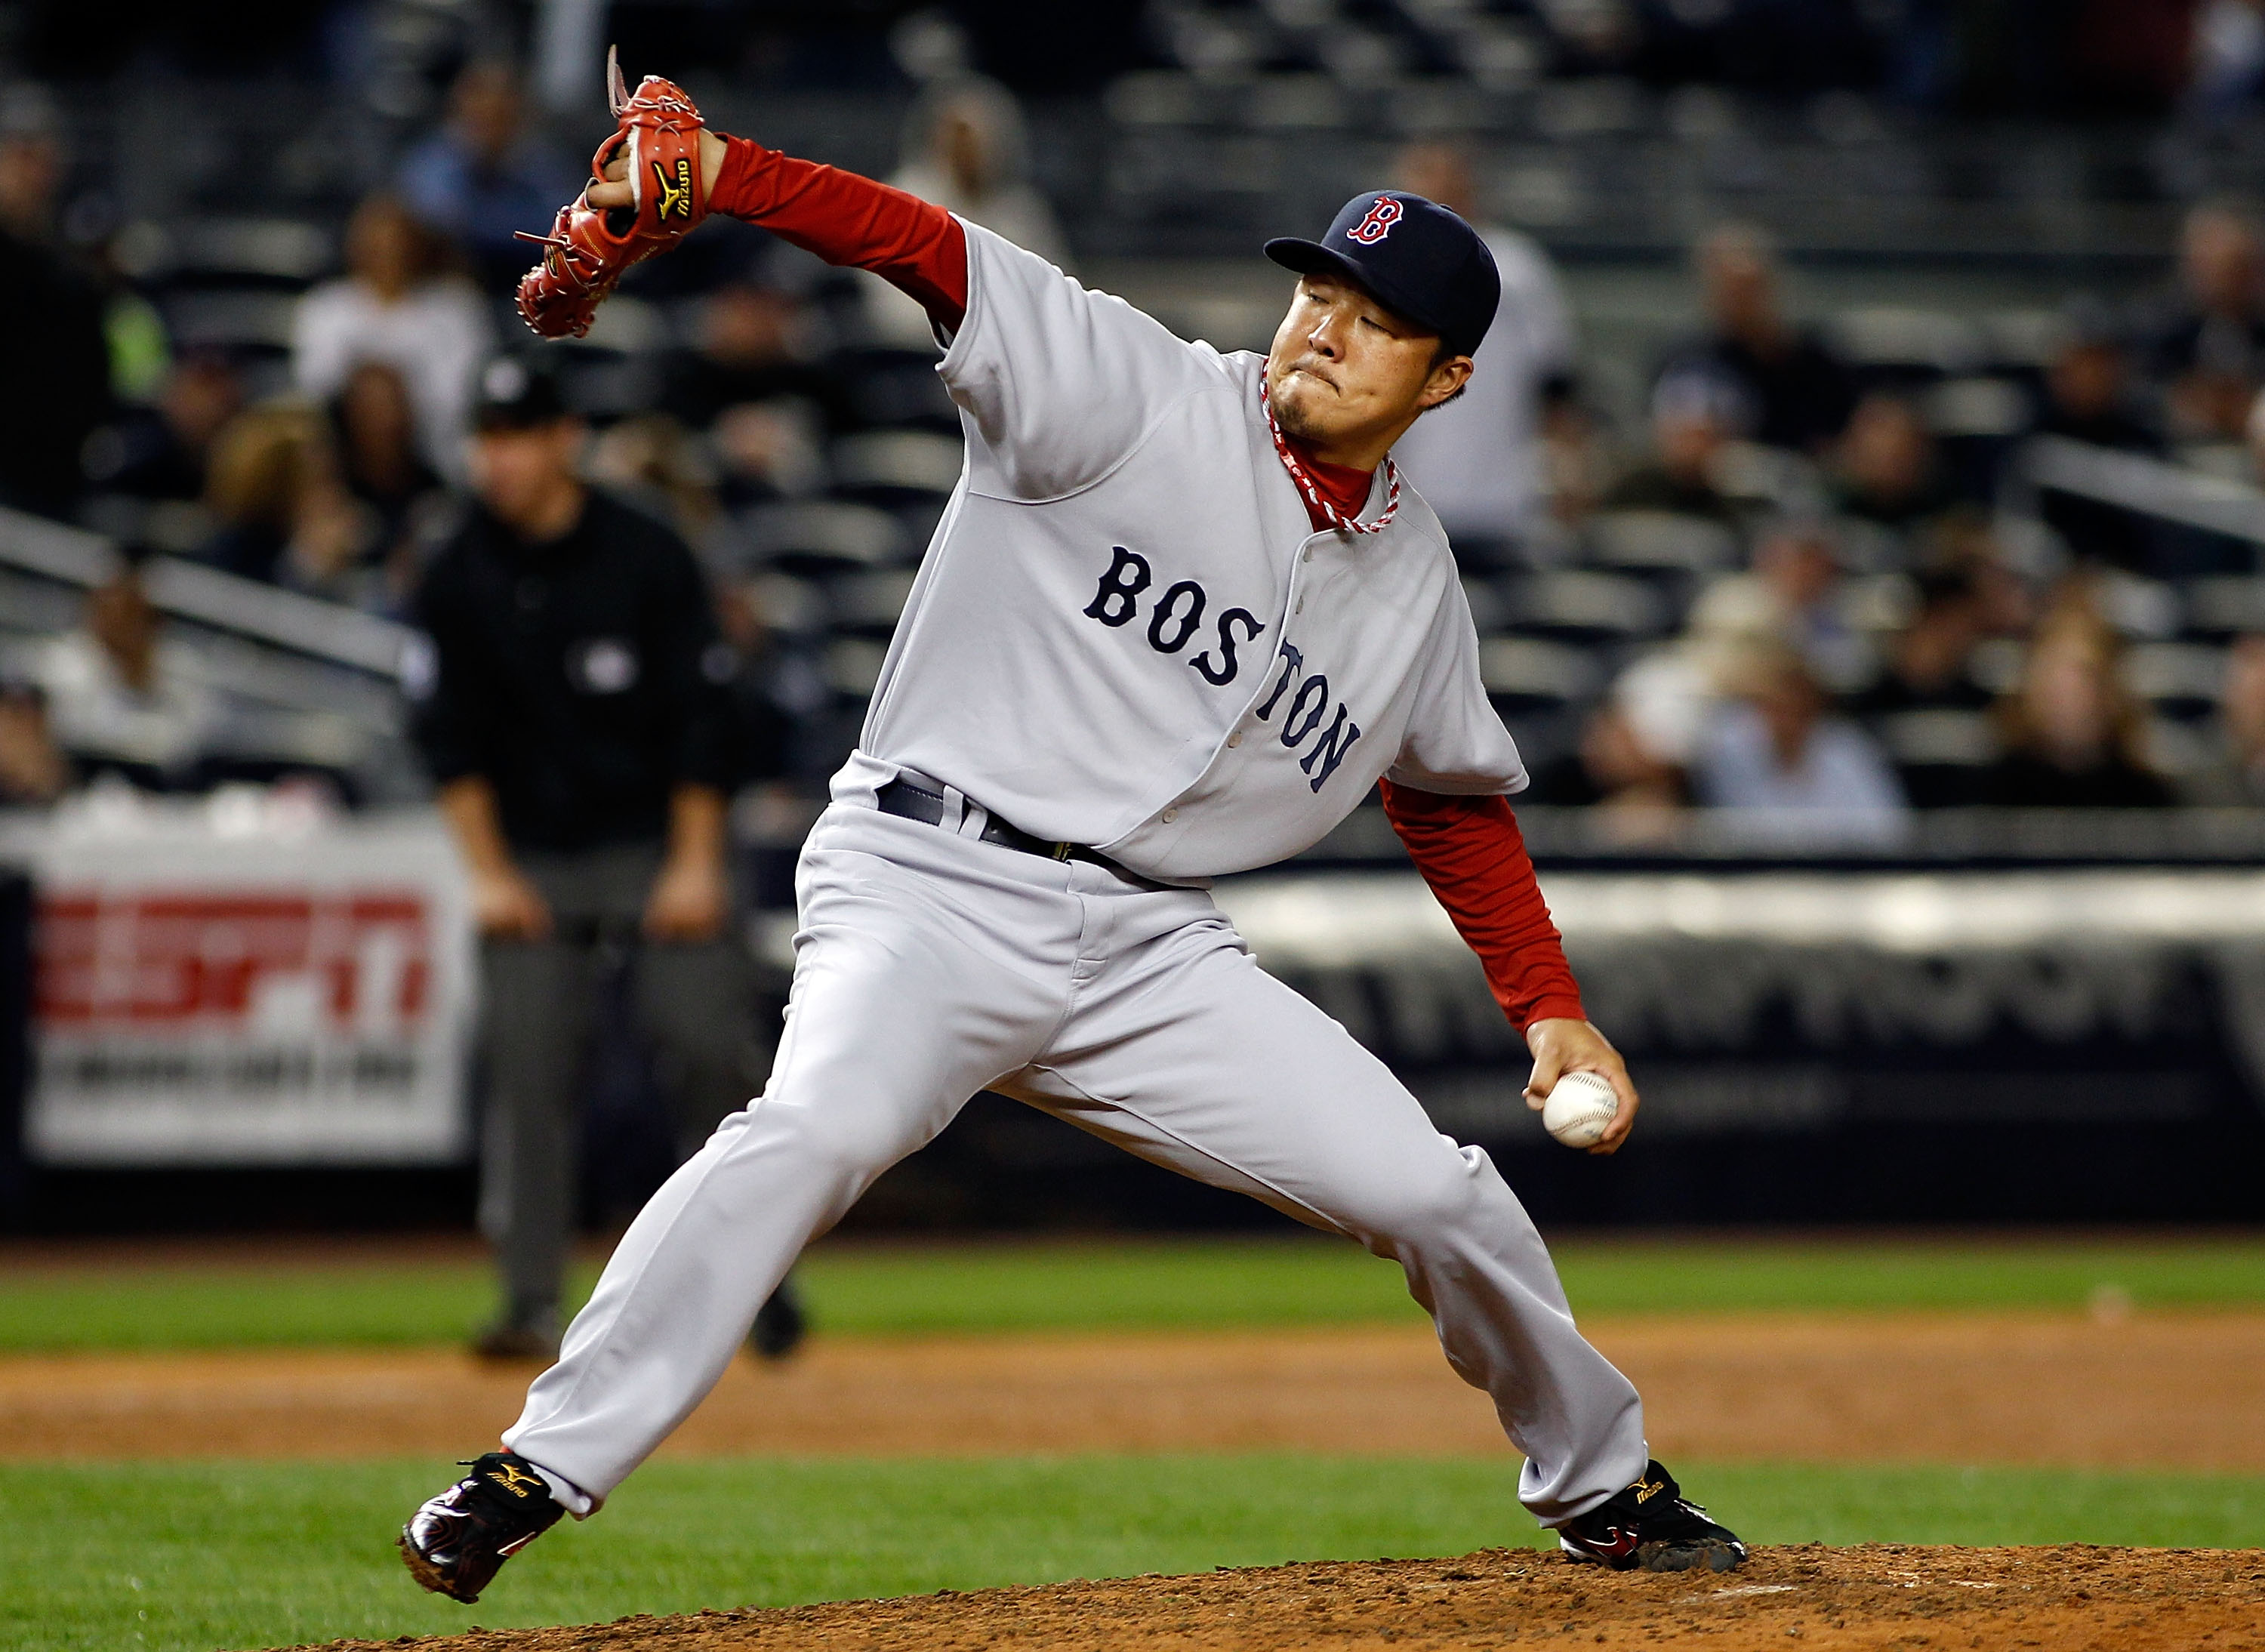 NEW YORK - SEPTEMBER 26: Hideki Okajima #37of the Boston Red Sox delivers a pitch against the New York Yankees on September 26, 2010 at Yankee Stadium in the Bronx borough of New York City. The Yankees won 4-3.  (Photo by Mike Stobe/Getty Images)